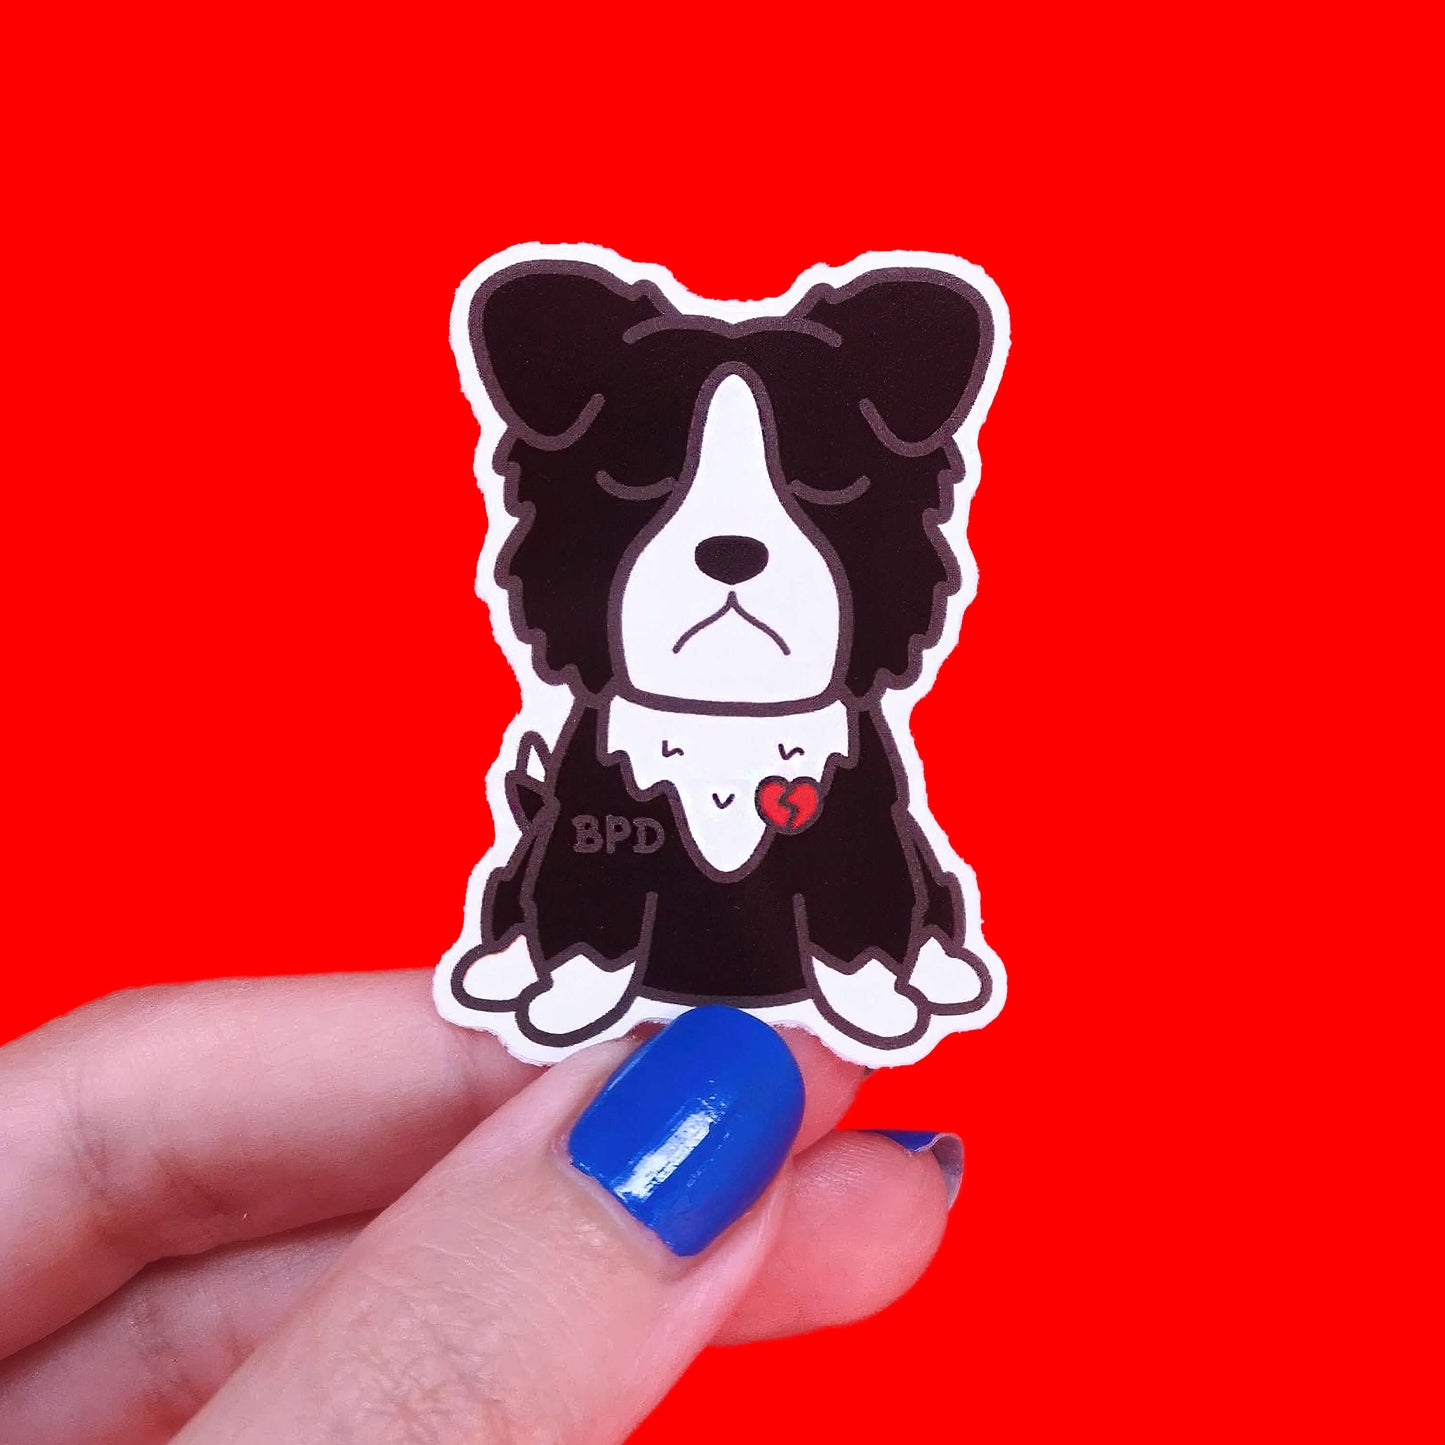 BPD Sticker - Borderline Personality Disorder being held up by a hand with blue nail varnish over a red background. The black and white sad fluffy dog sticker has a broken heart with BPD written across its chest. The sticker is designed to raise awareness for Borderline Personality Disorder.